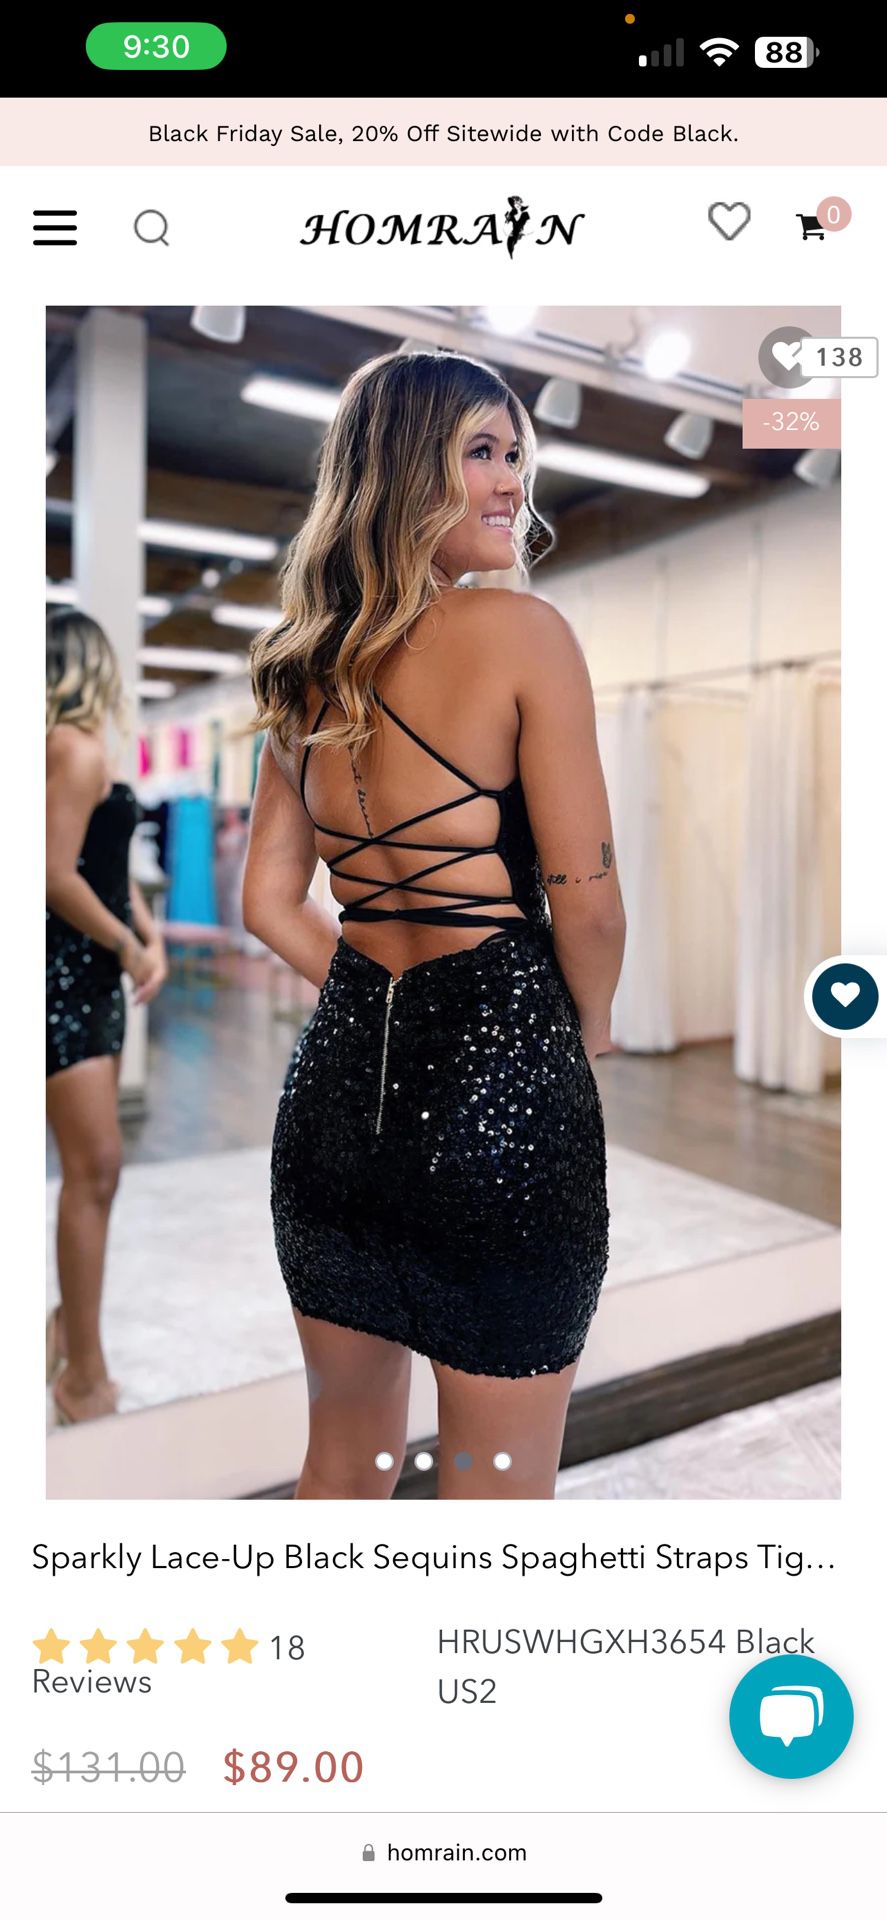 Sparkly Lace-Up Black Sequins Spaghetti Strap Dress PROM